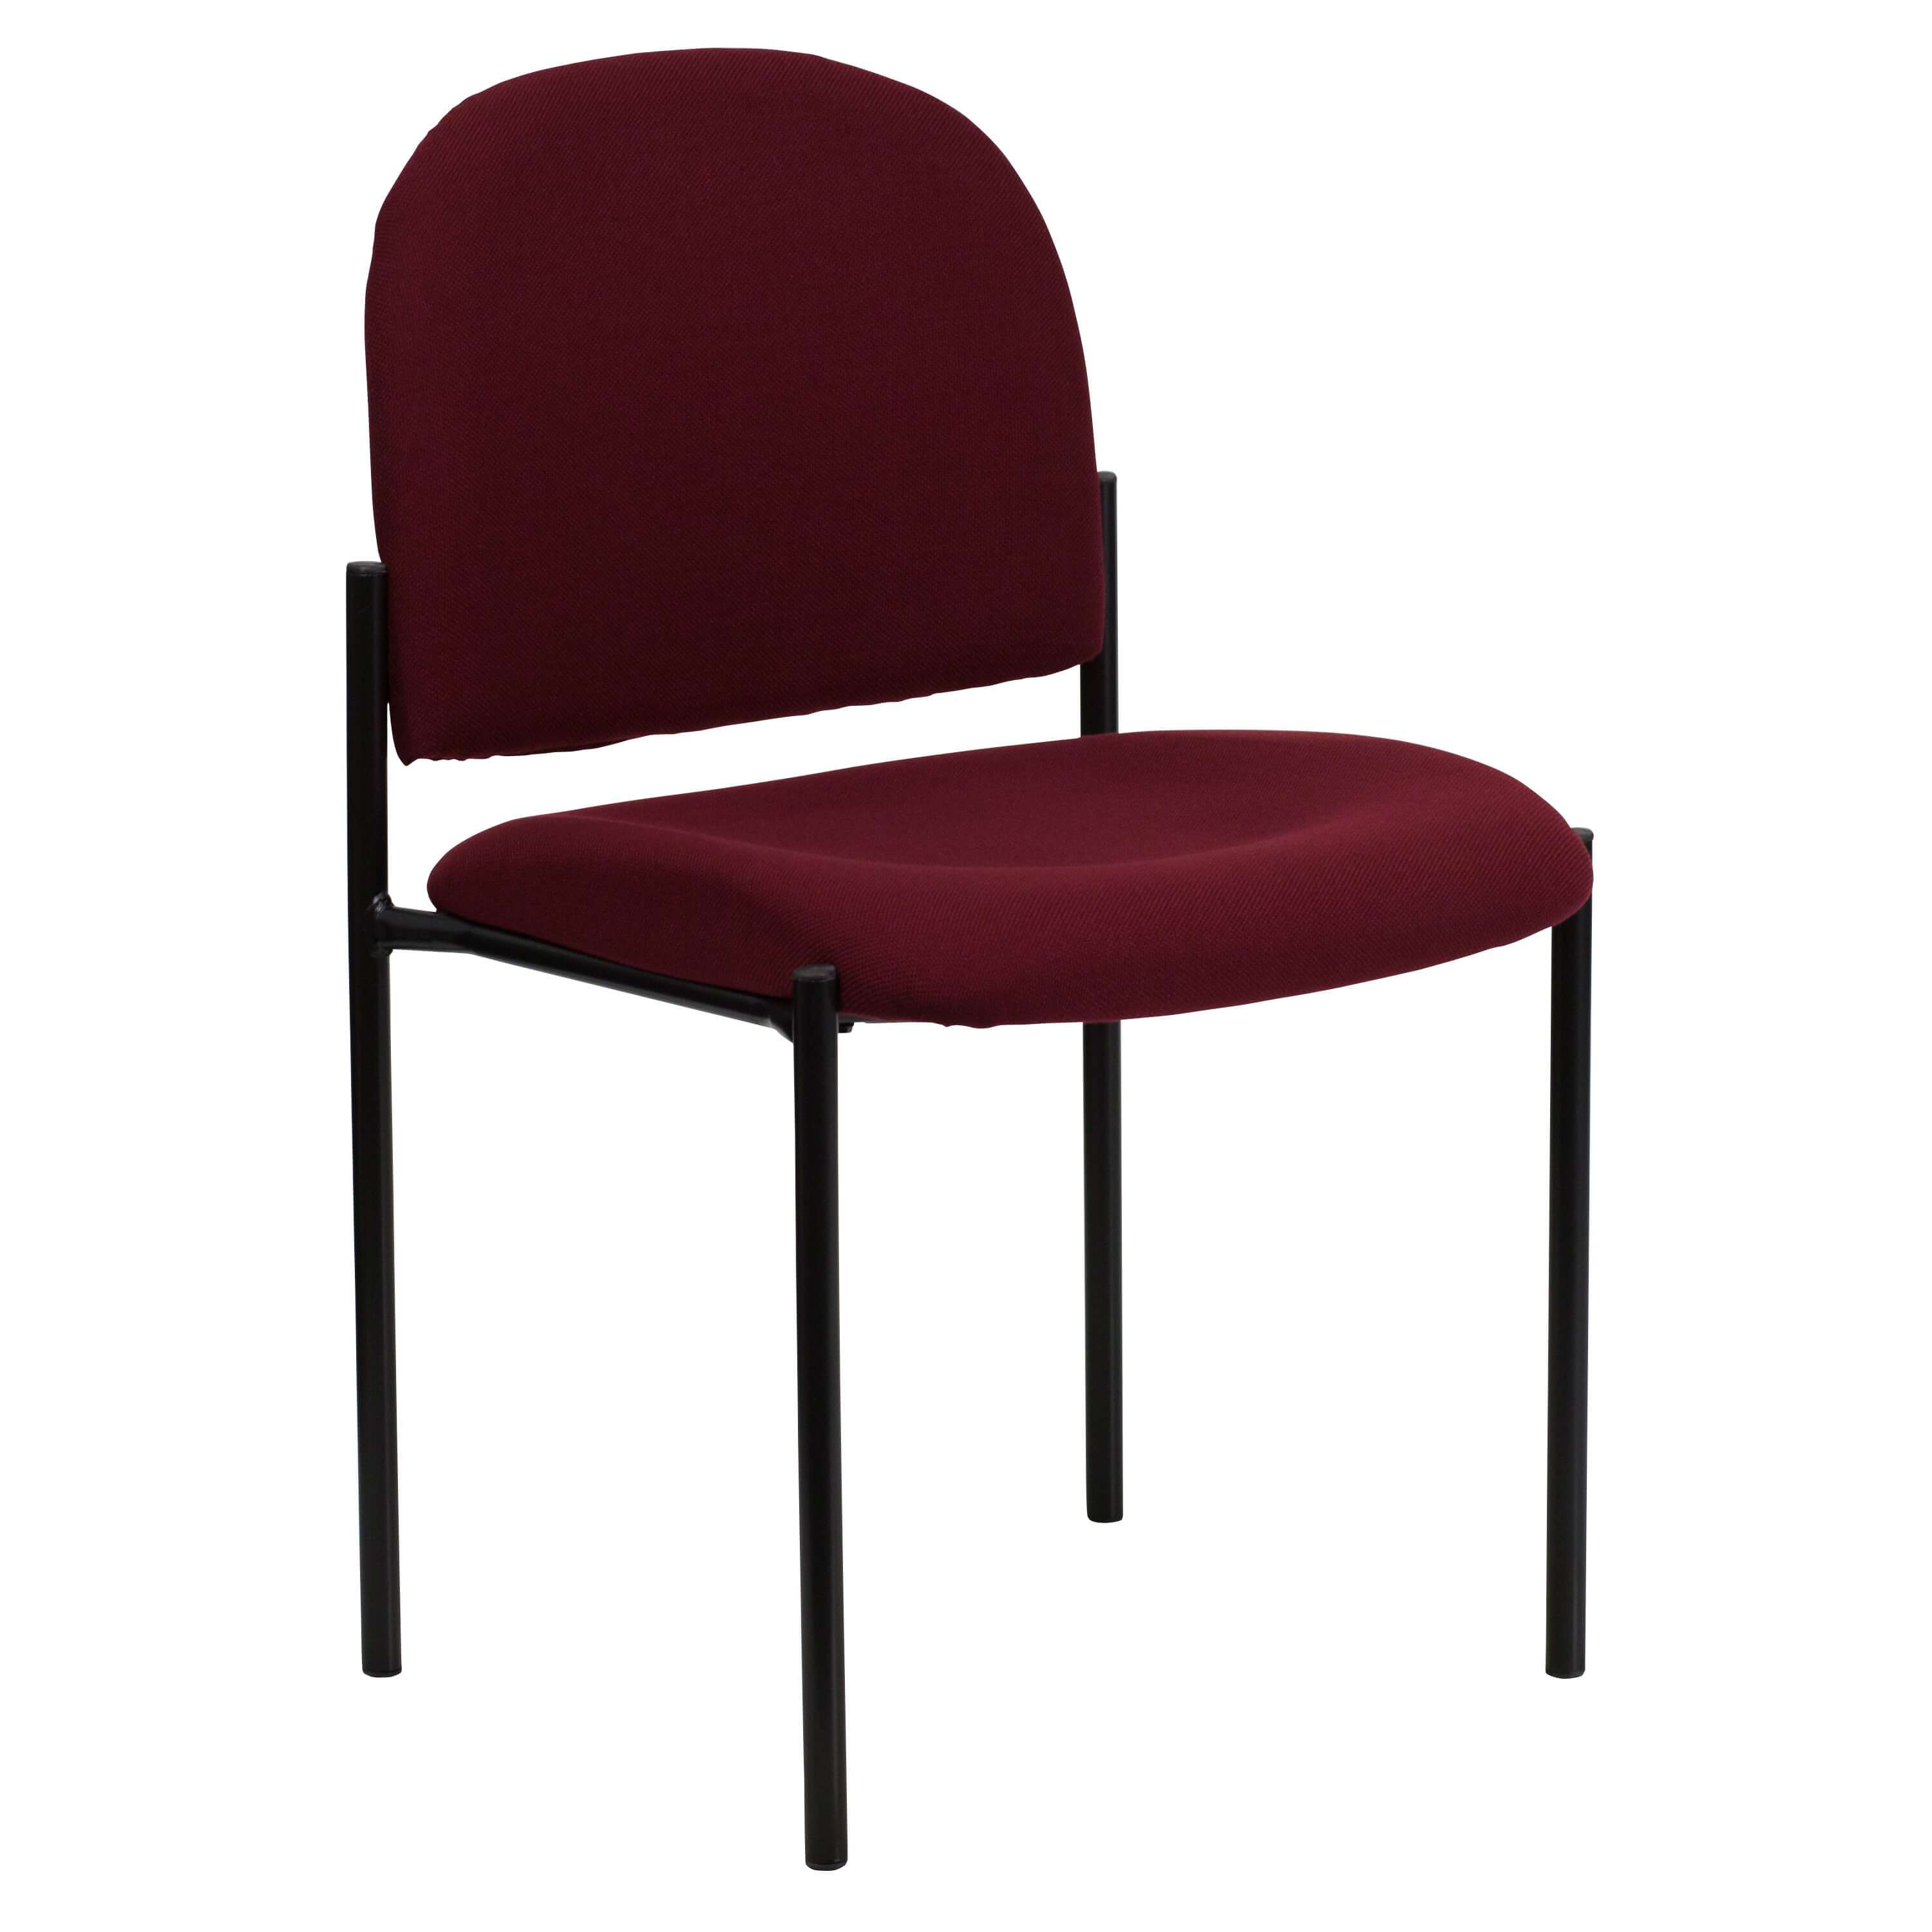 Stackable chairs CUB BT 515 1 BY GG FLA